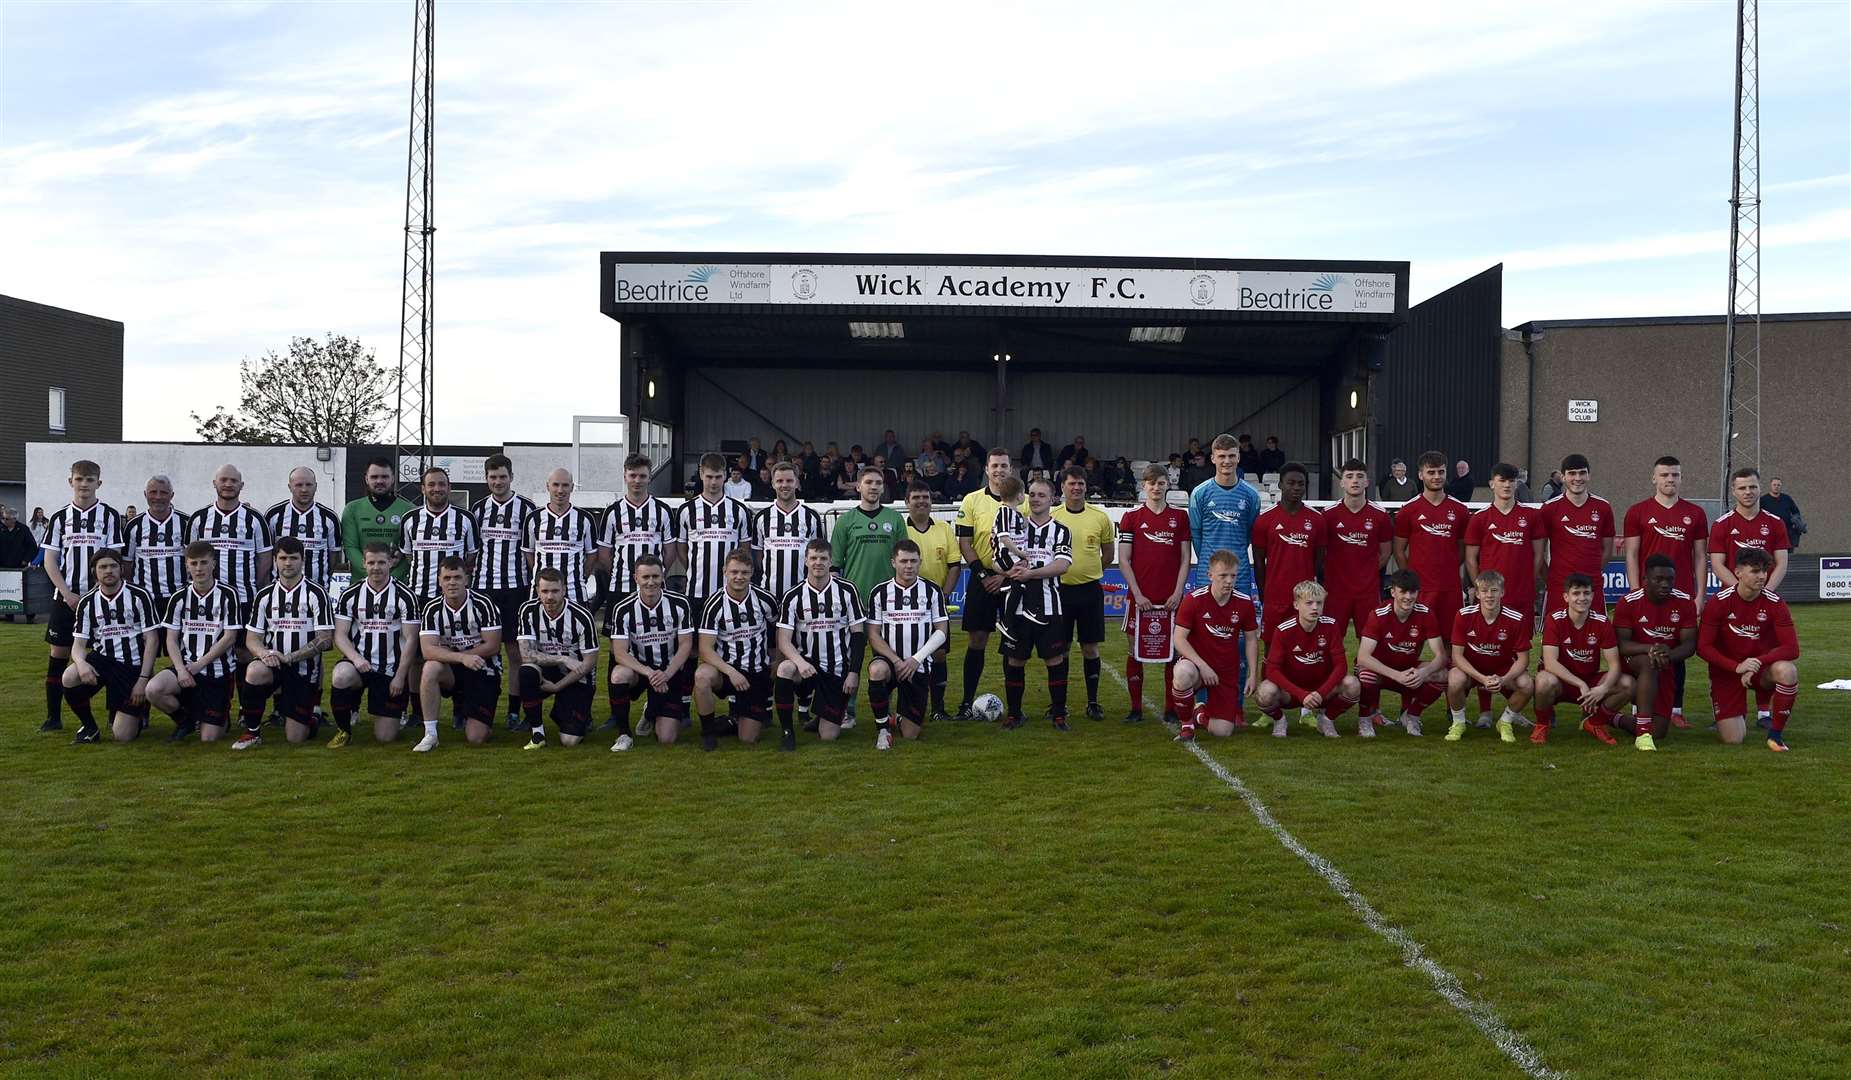 The Wick Academy and Aberdeen teams and match officials before the game, with Richard Macadie and son Oscar in the middle. Picture: Bob Roger